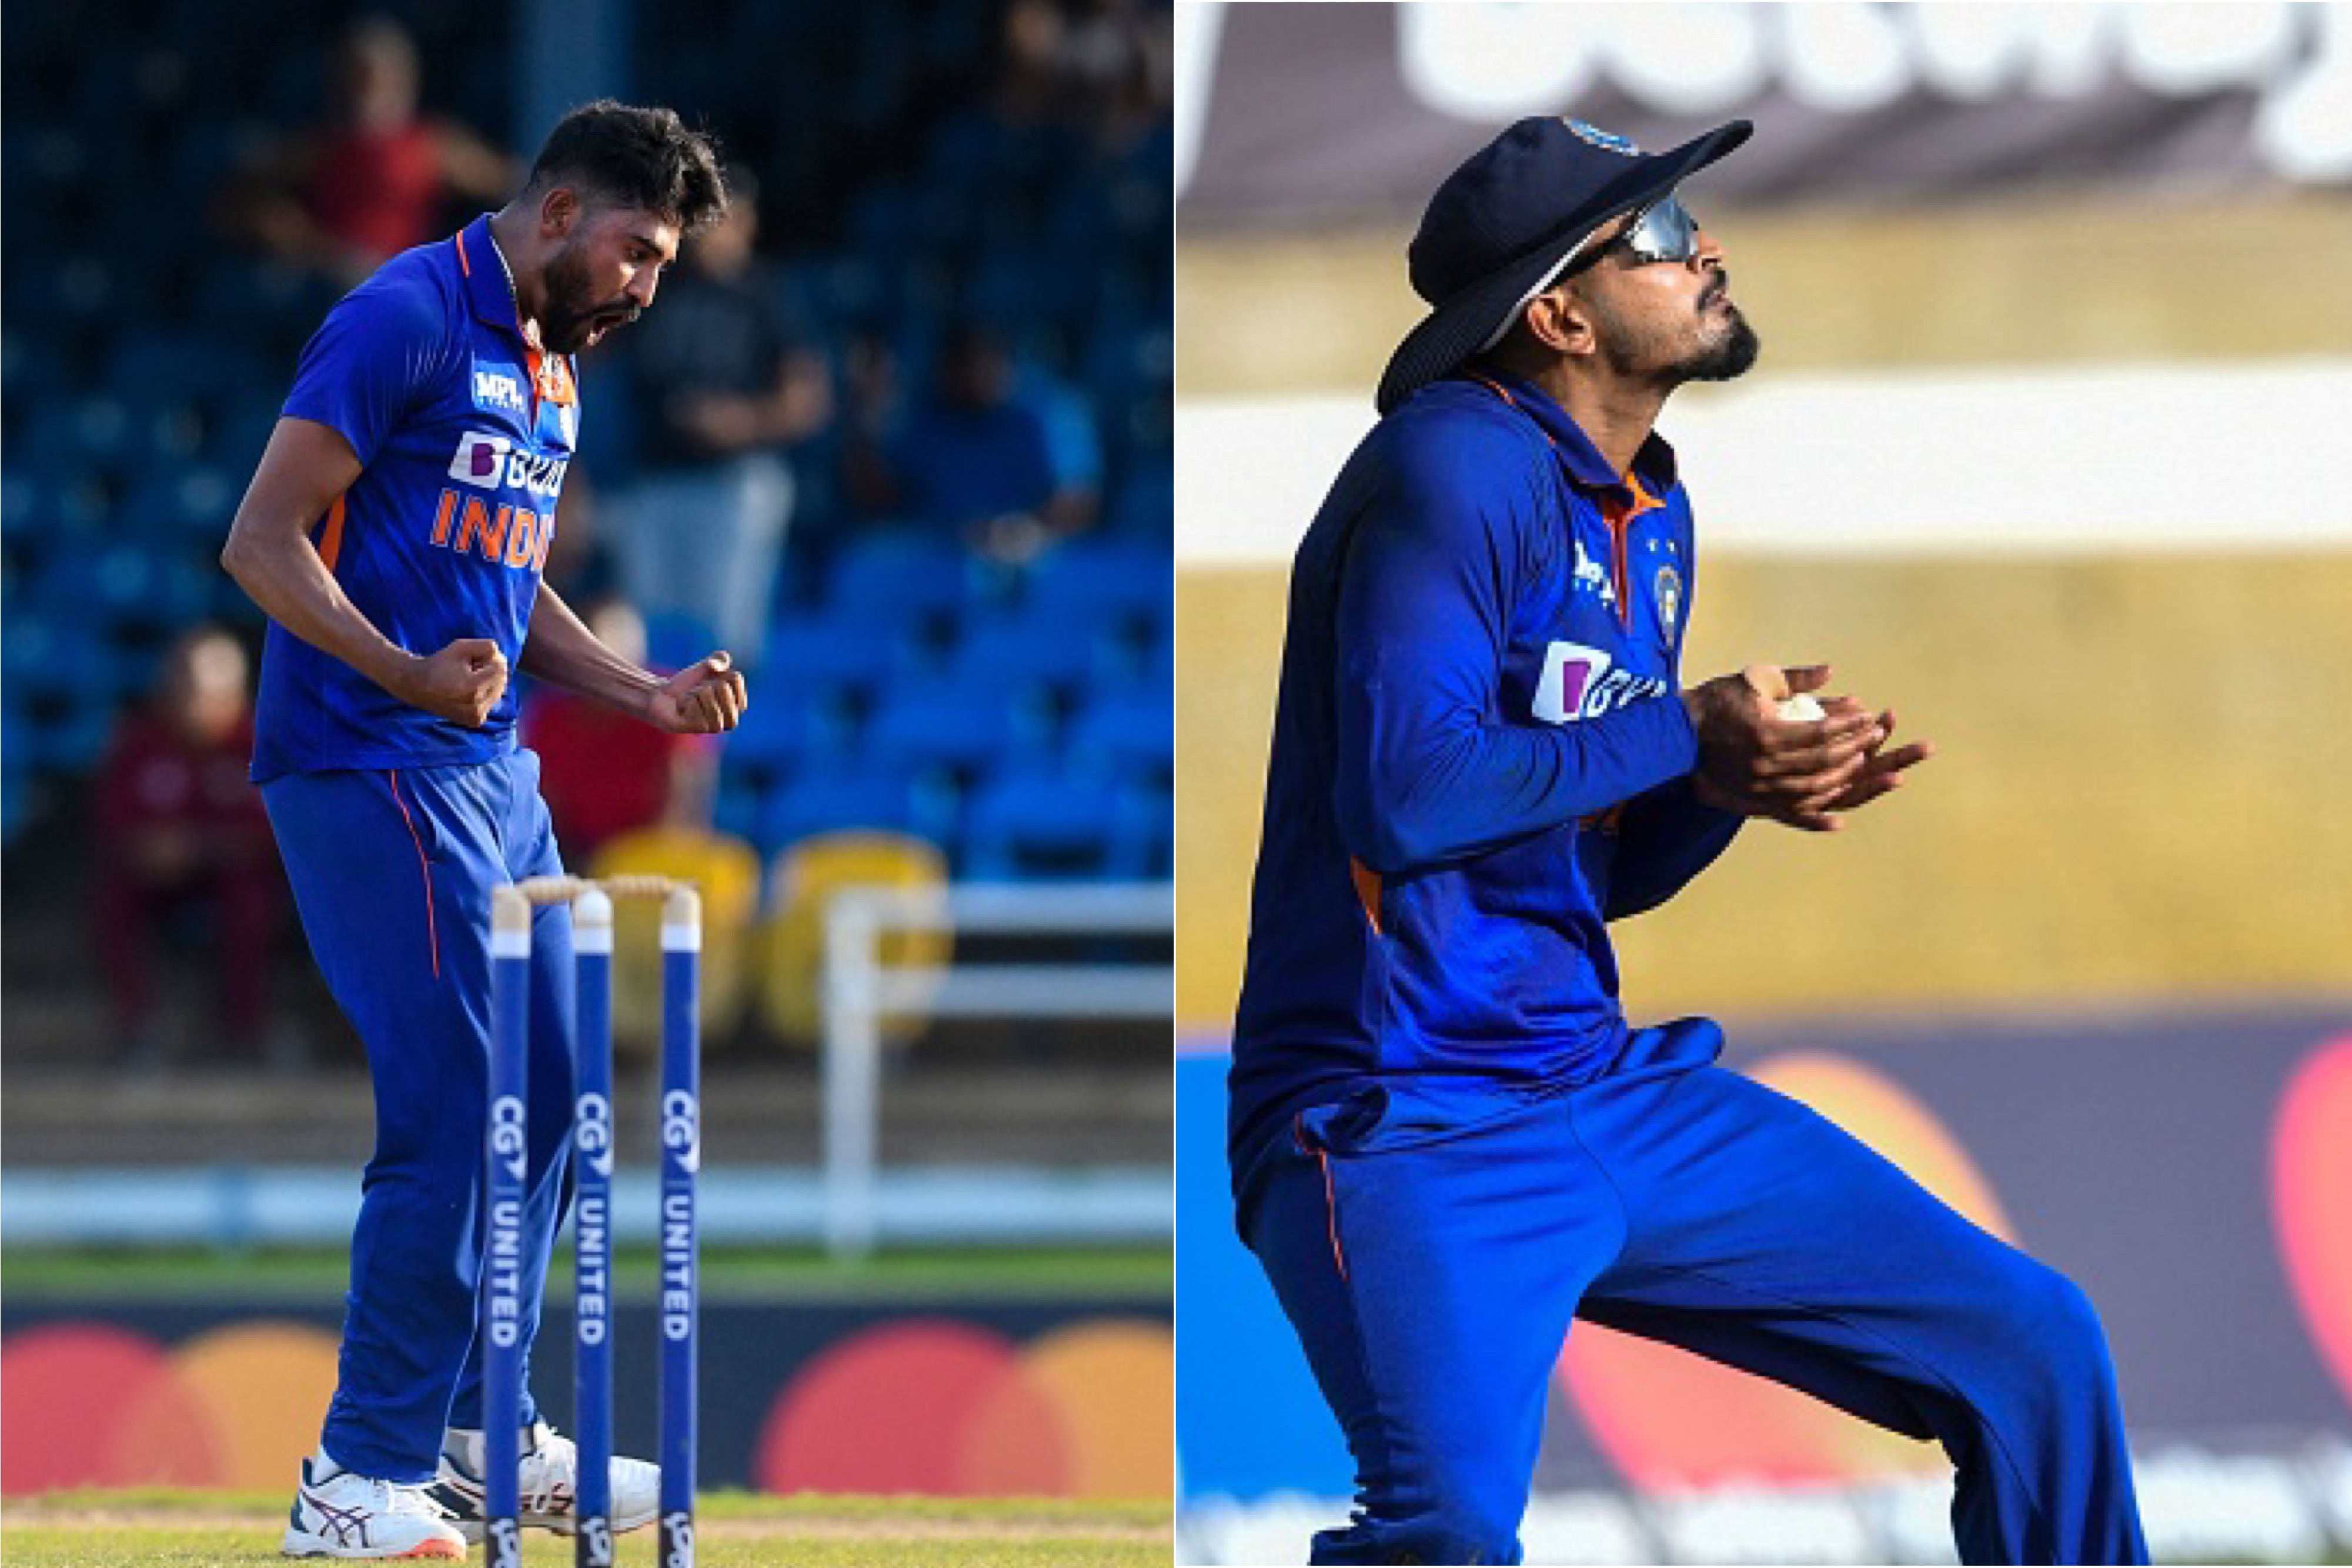 WI v IND 2022: WATCH - Siraj opens up on bowling the final over in 1st ODI; Shreyas explains his dance after taking a catch